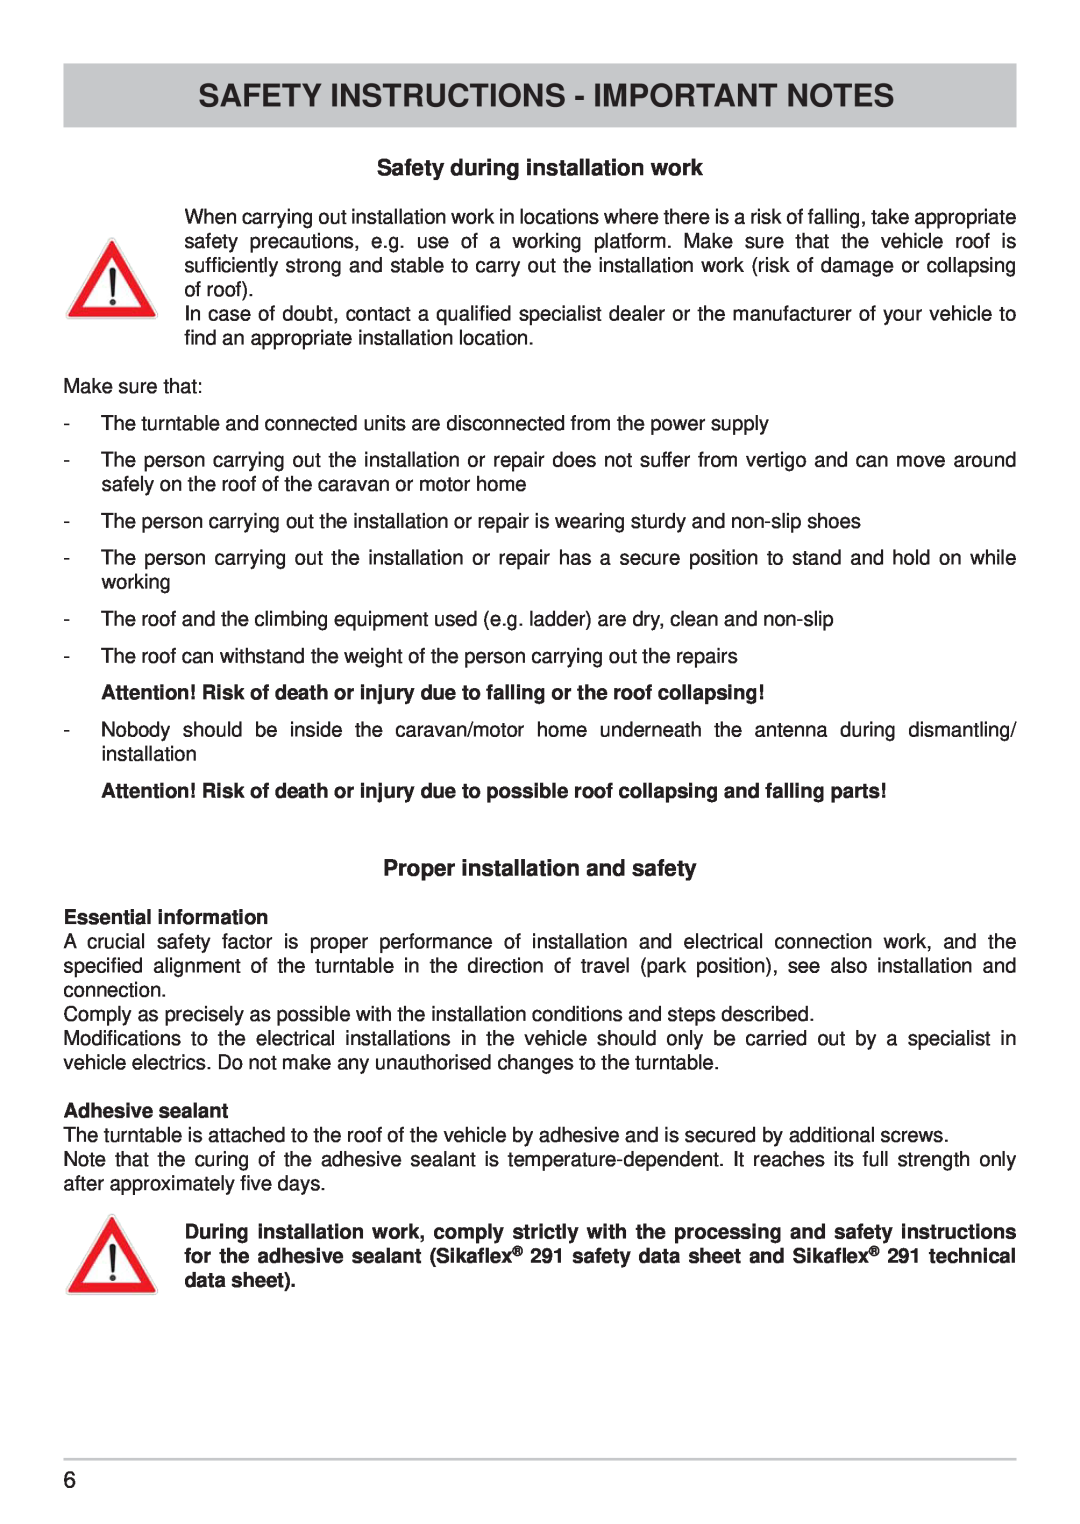 Kathrein CAP 700 Safety Instructions - Important Notes, Safety during installation work, Proper installation and safety 